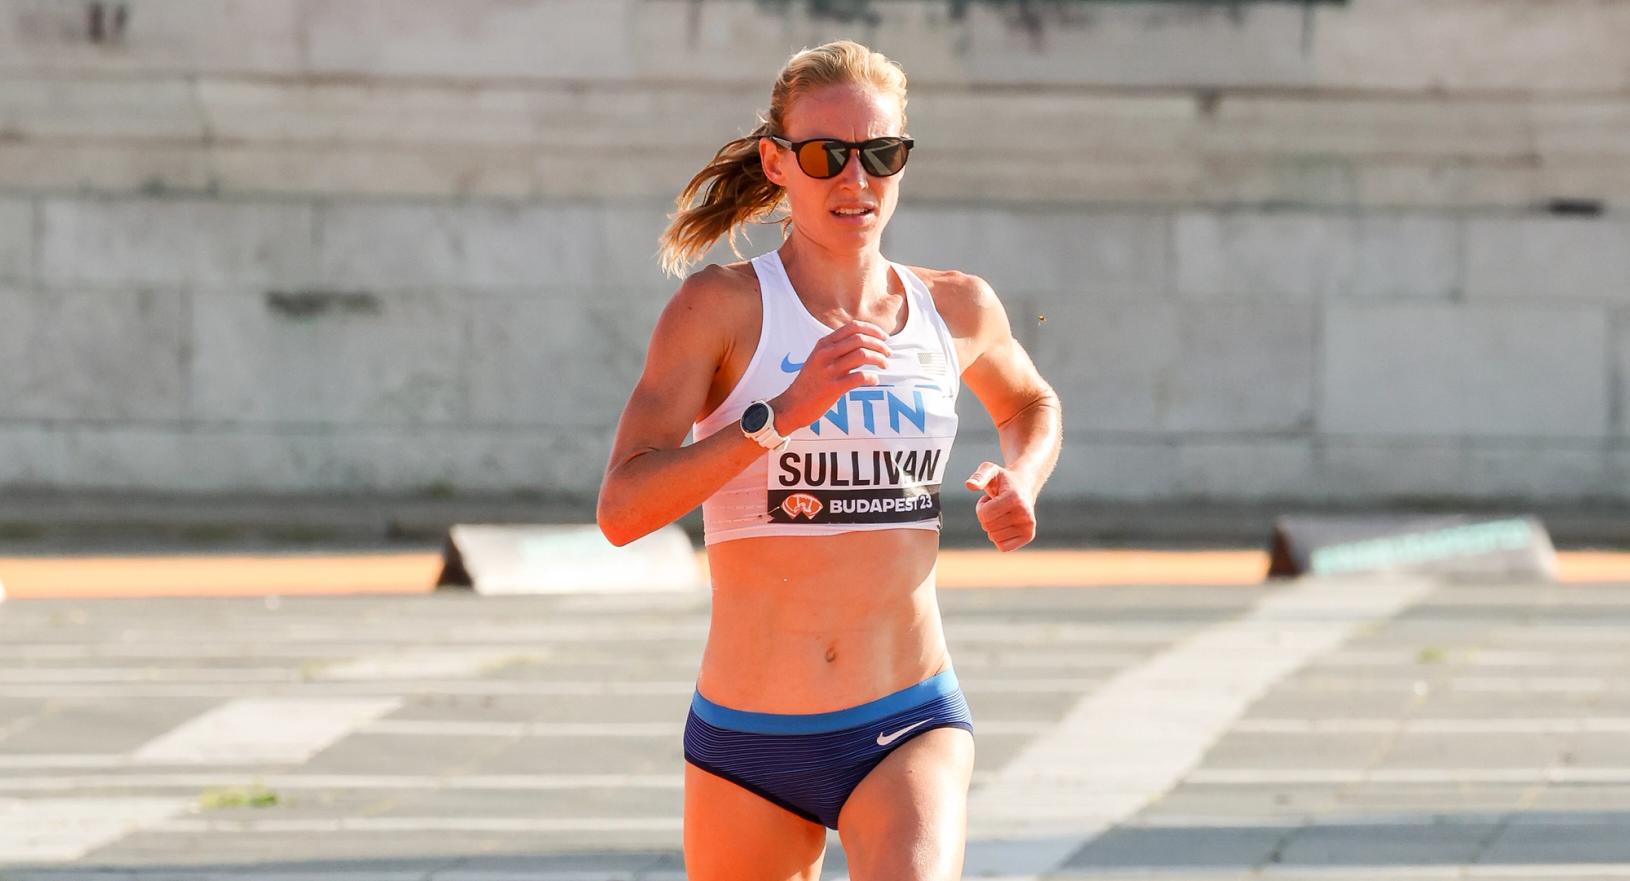 The Most Fun Facts From U.S. Olympic Marathon Trials Women's